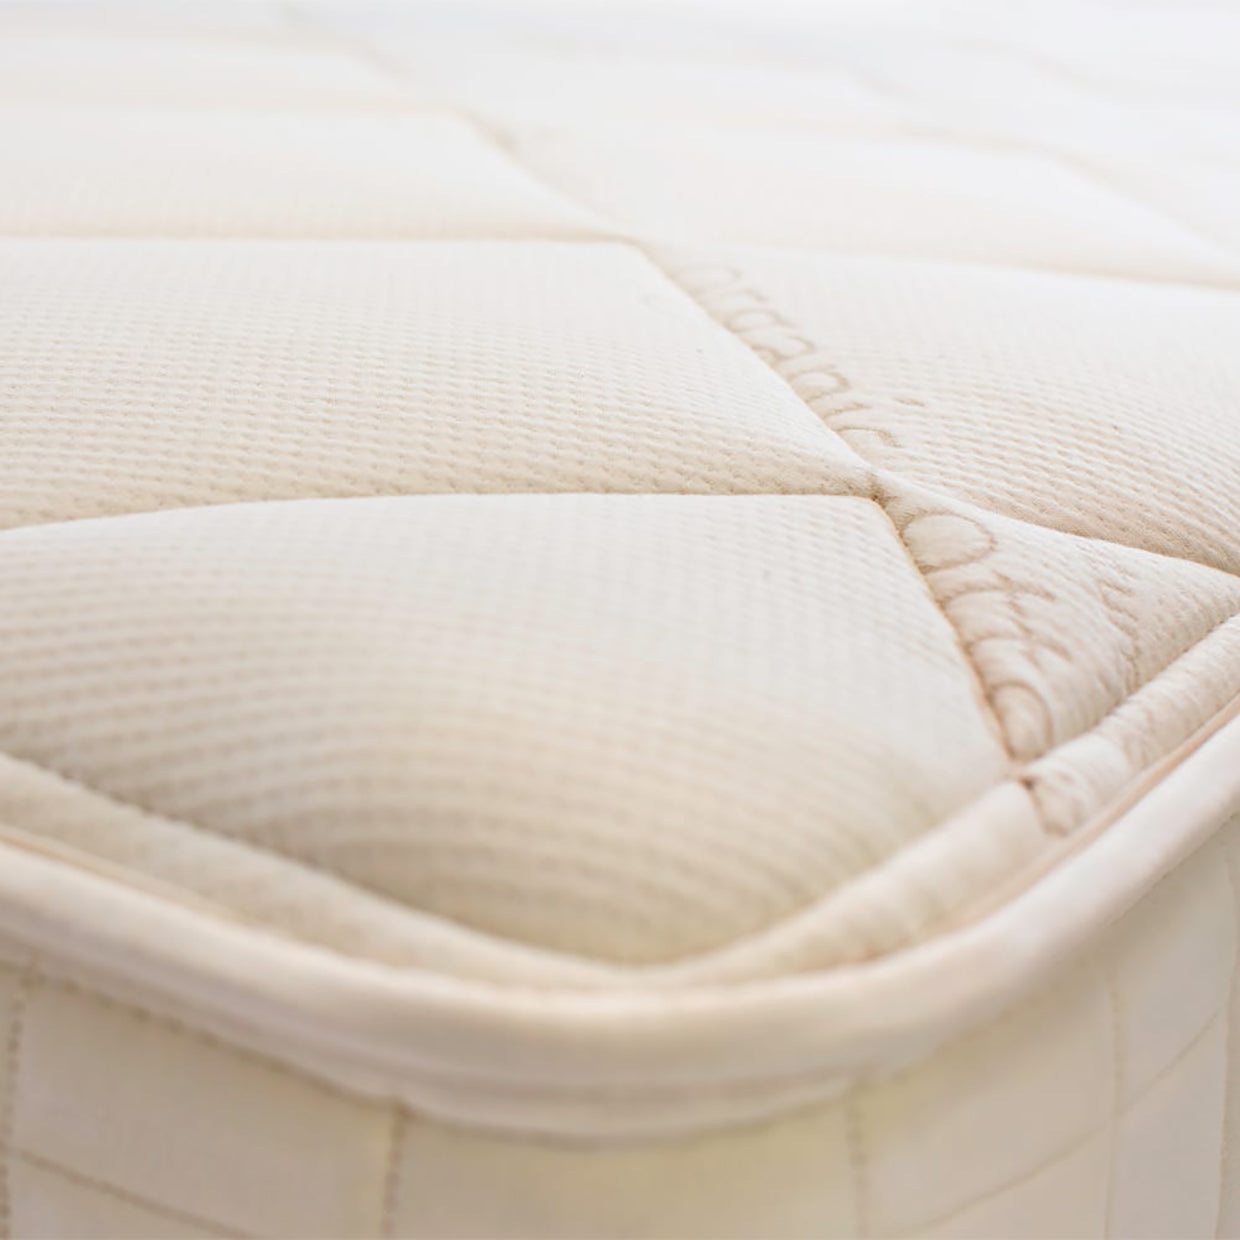 Certified Organic Cotton Mattresses in Canada - Luxurious Beds and Linens